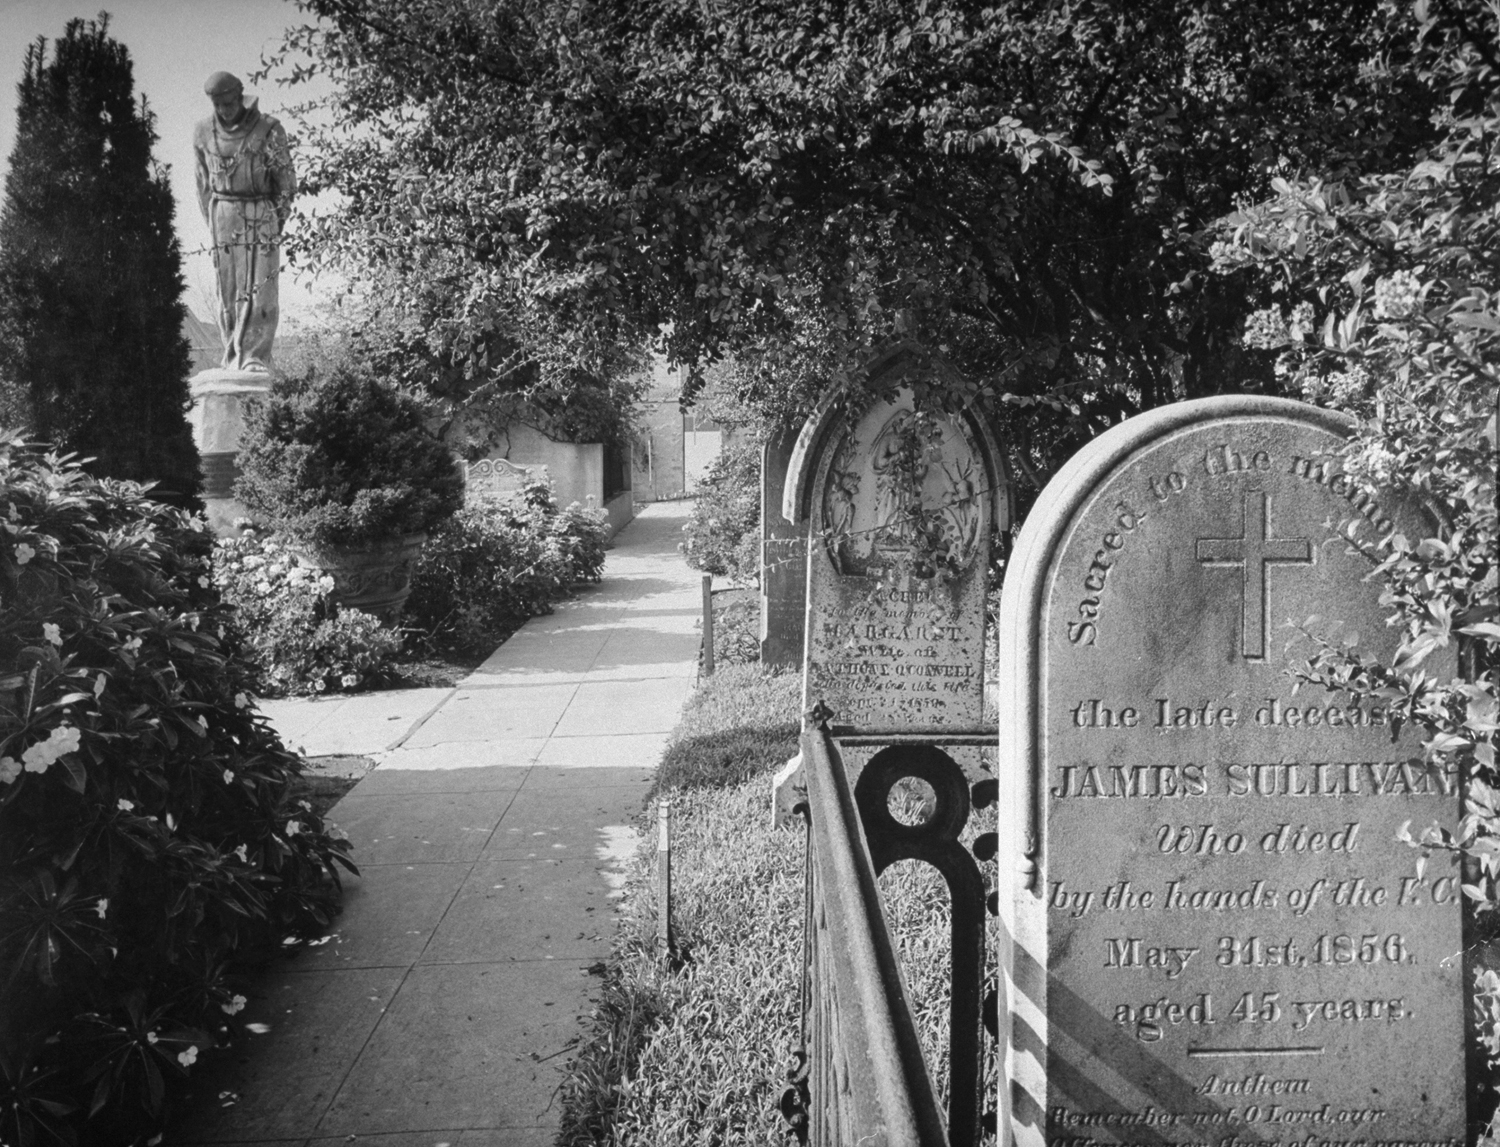 Cemetery of Mission Dolores, San Francisco, 1942.